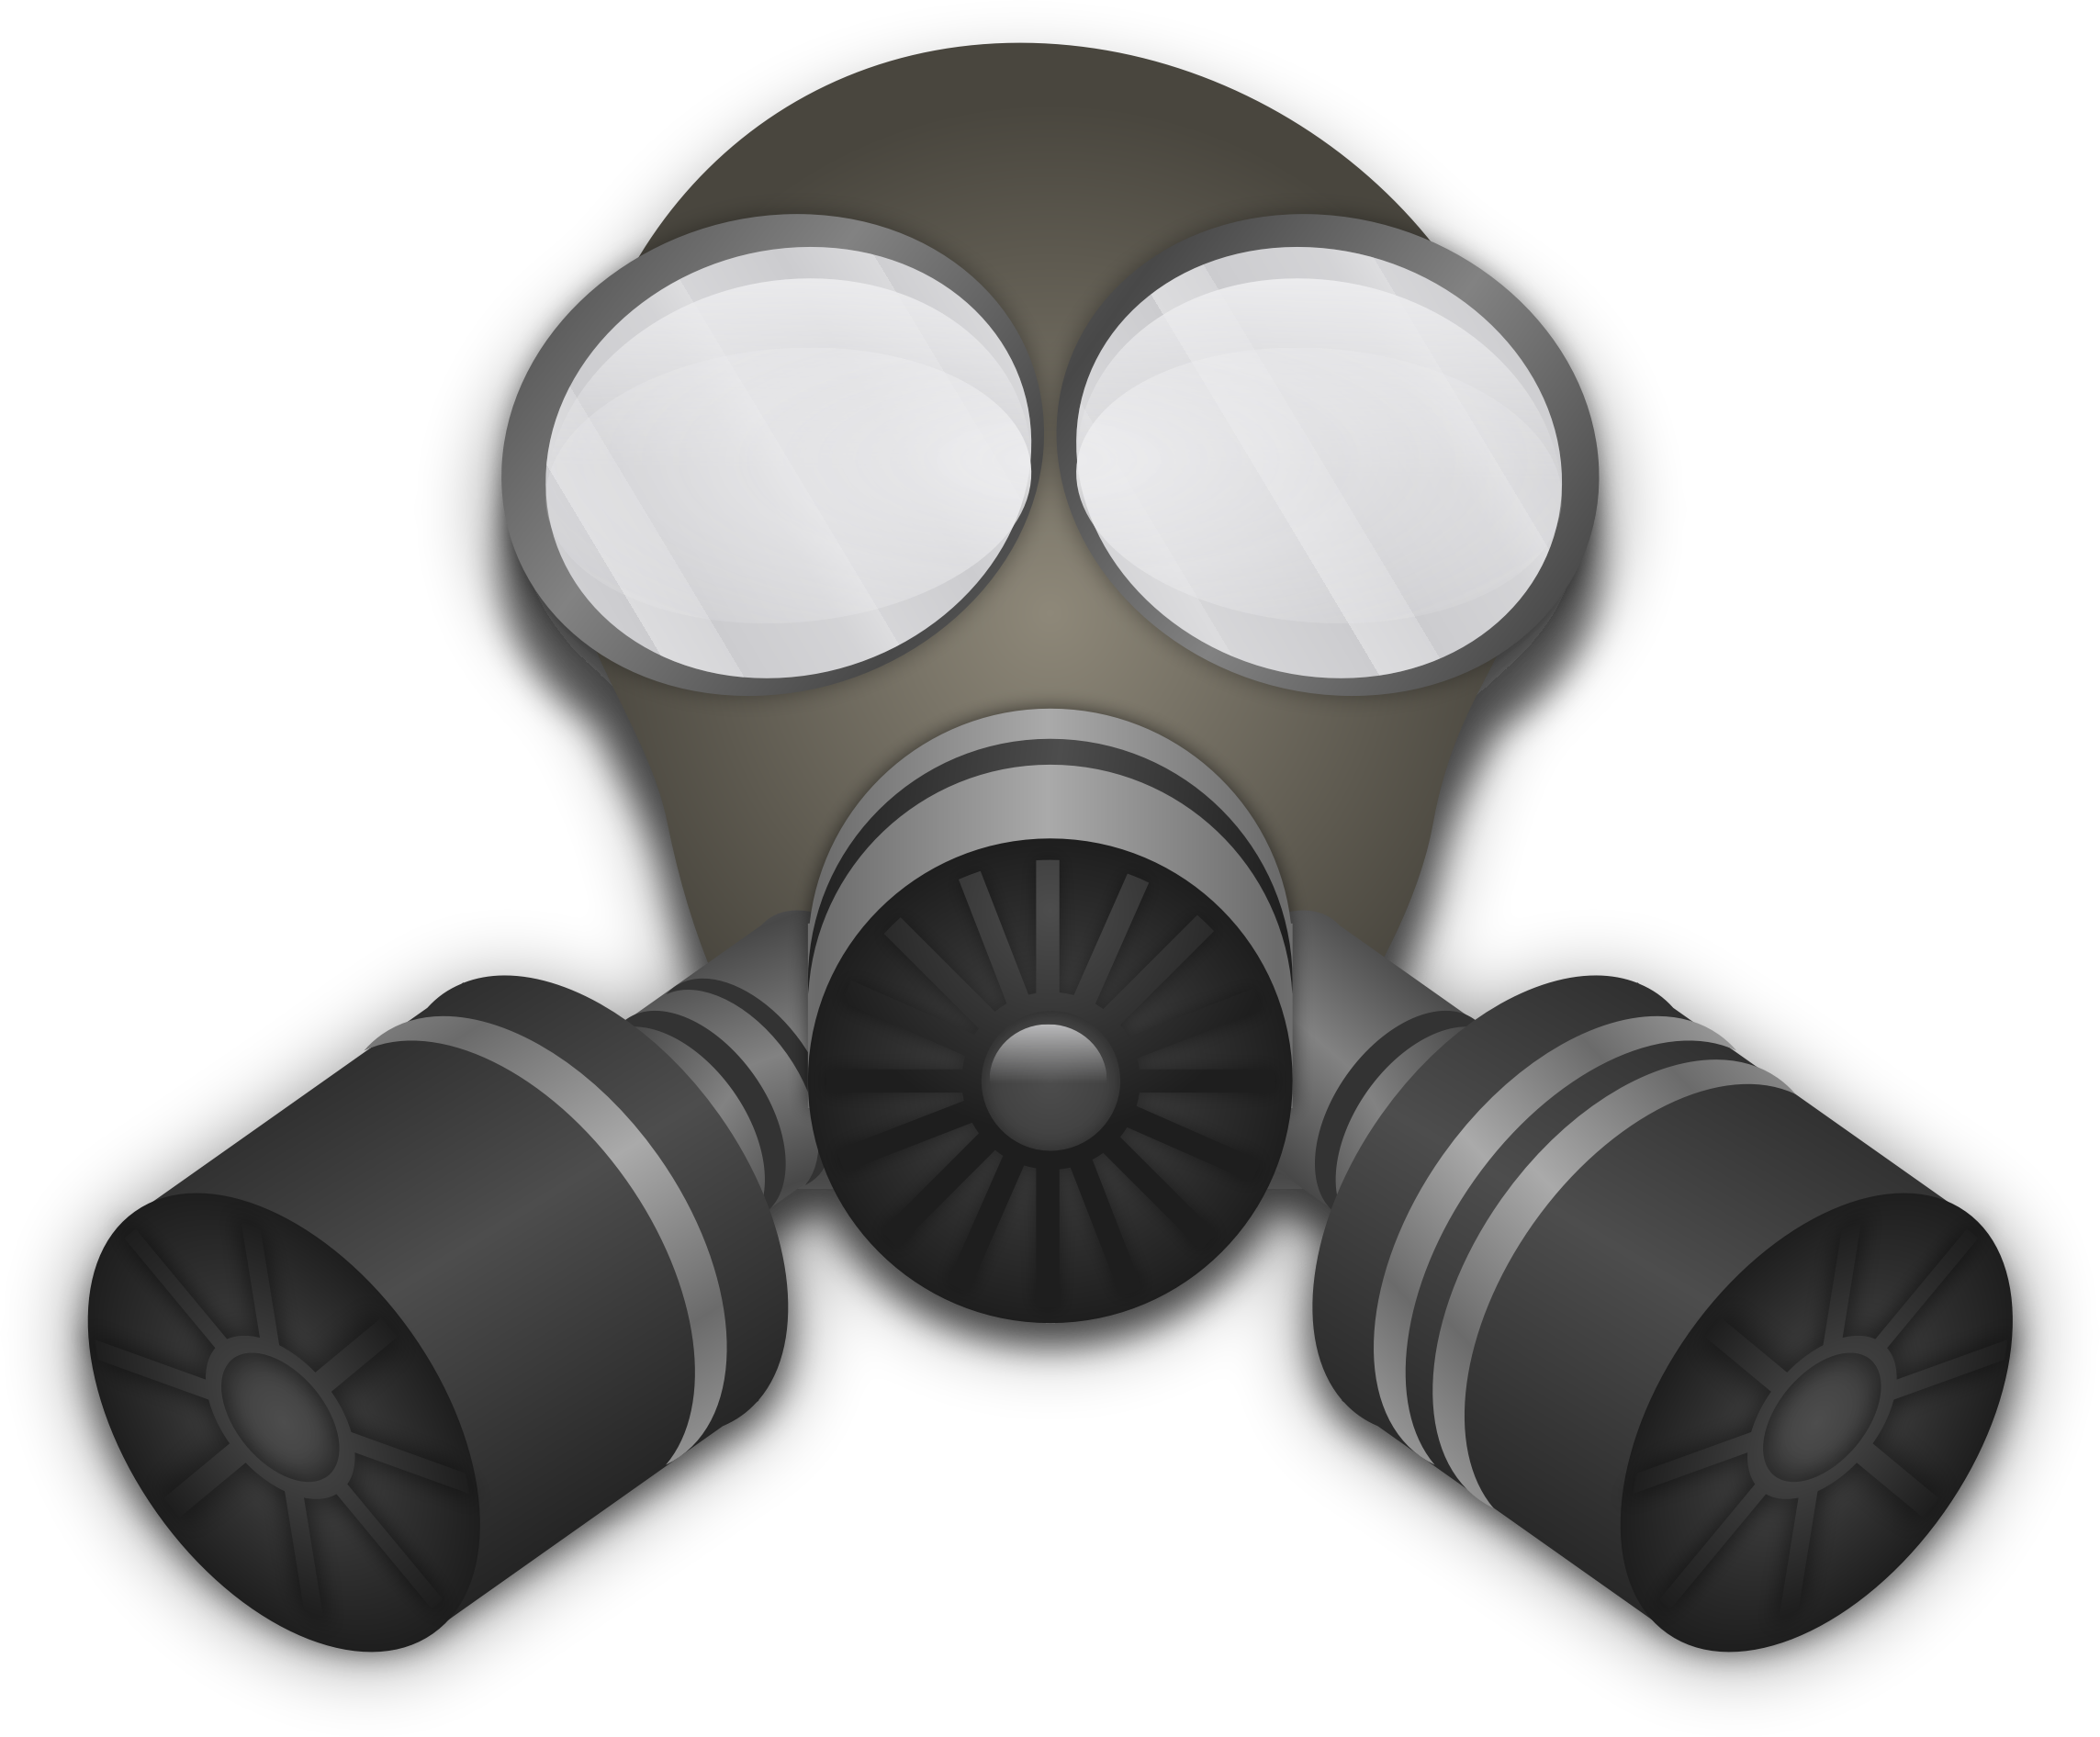 Gas Mask PNG Images Gas Mask Drawing Pictures Free Transparent PNG Logos